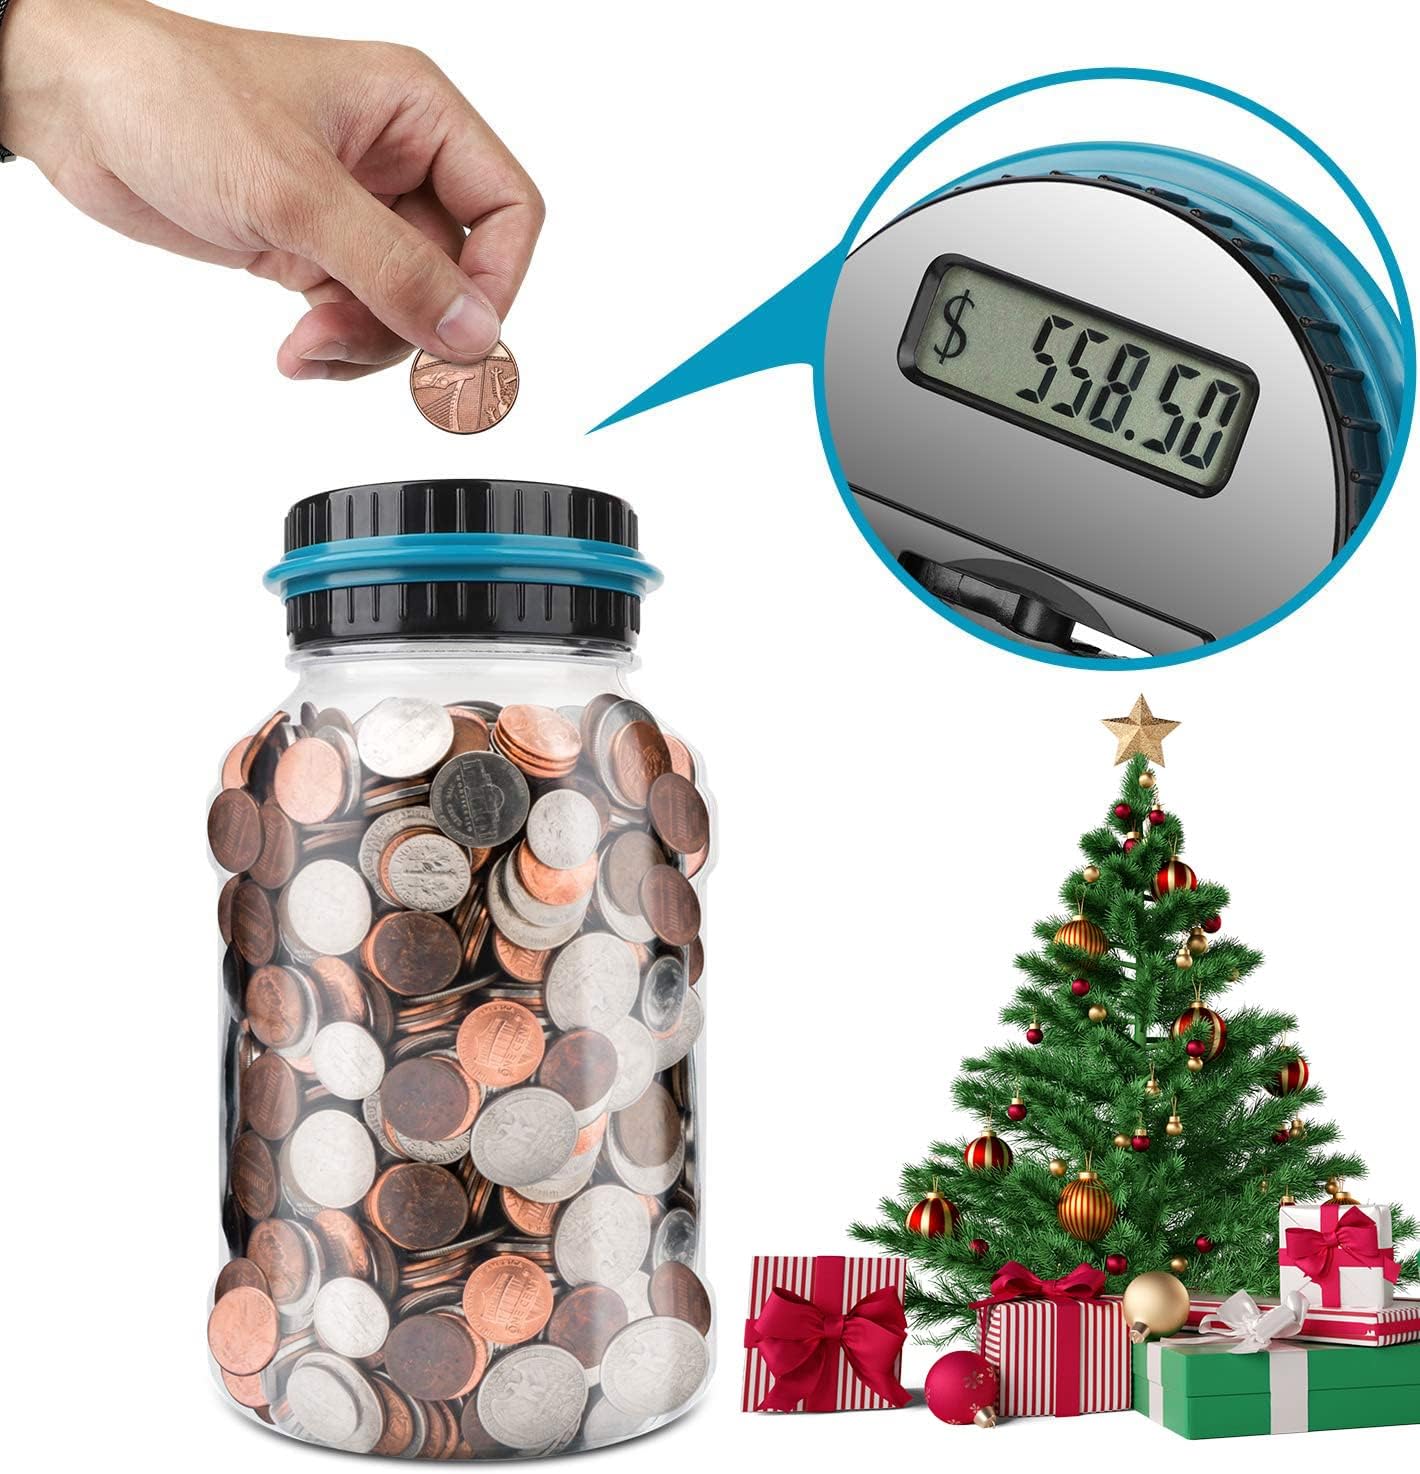 Lefree Big Piggy Bank, Digital Counting Coin Bank,Money Saving Jar,Gift,Powered by 2AAA Battery (Not Included) 1.8L - image 3 of 6